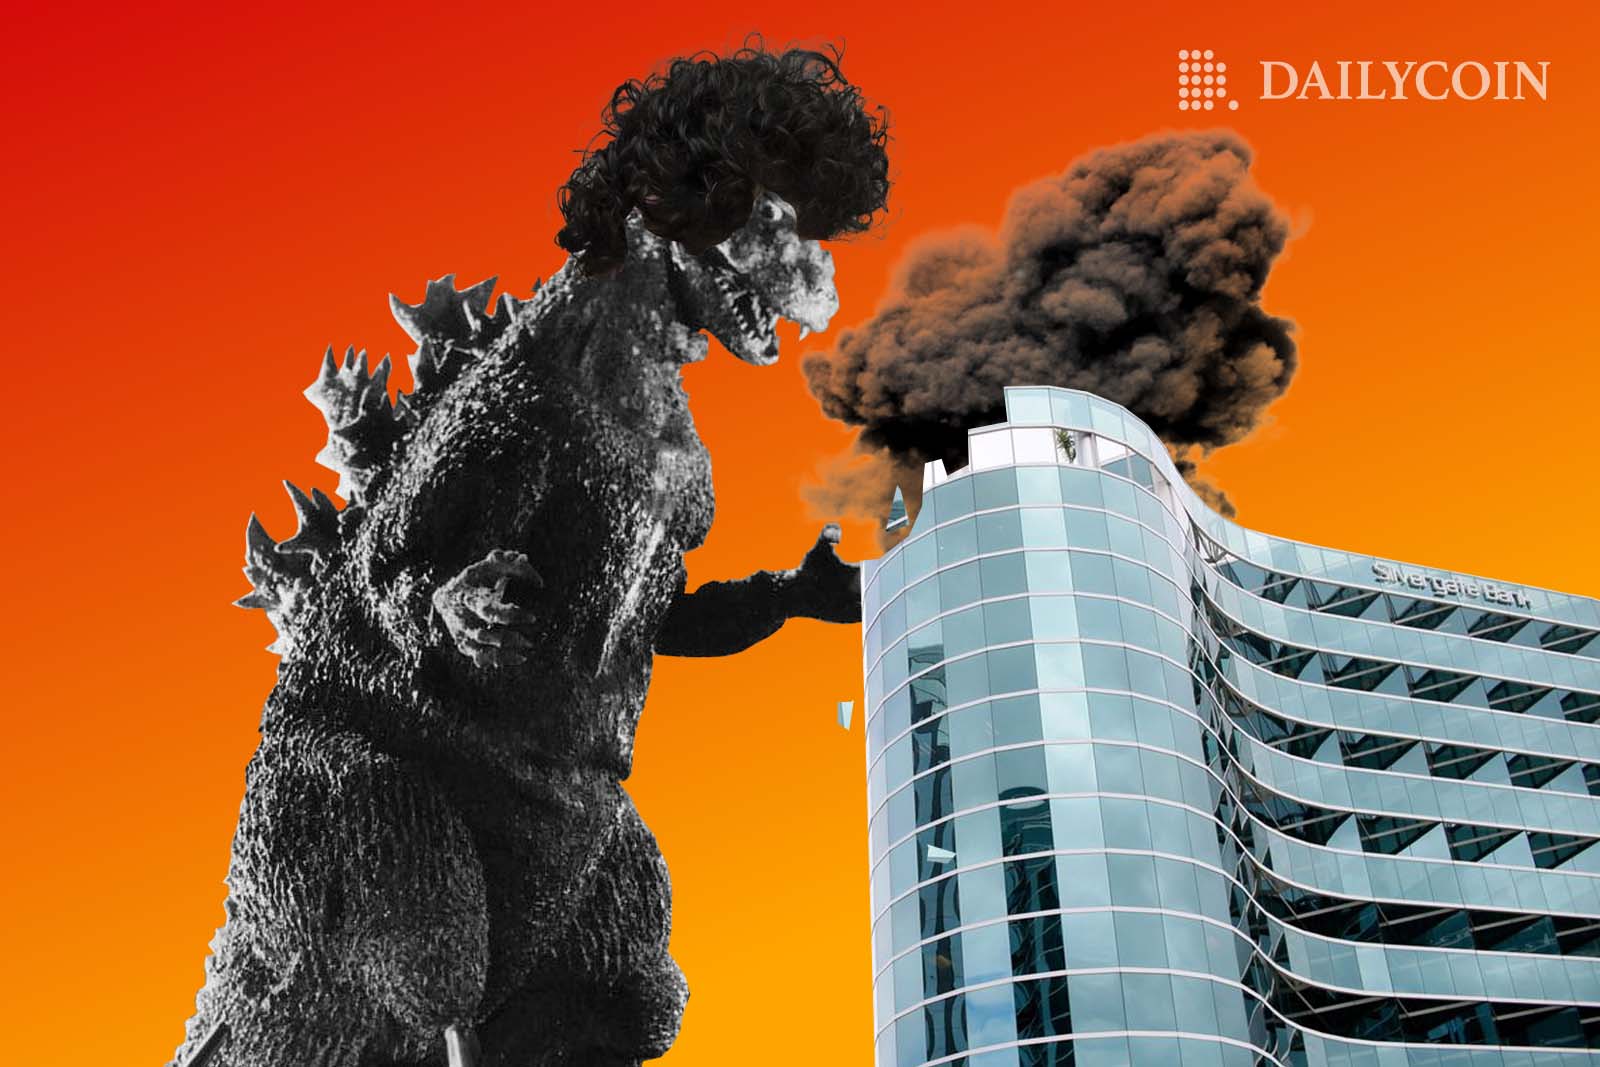 A godzilla with human hair in front of a bank.